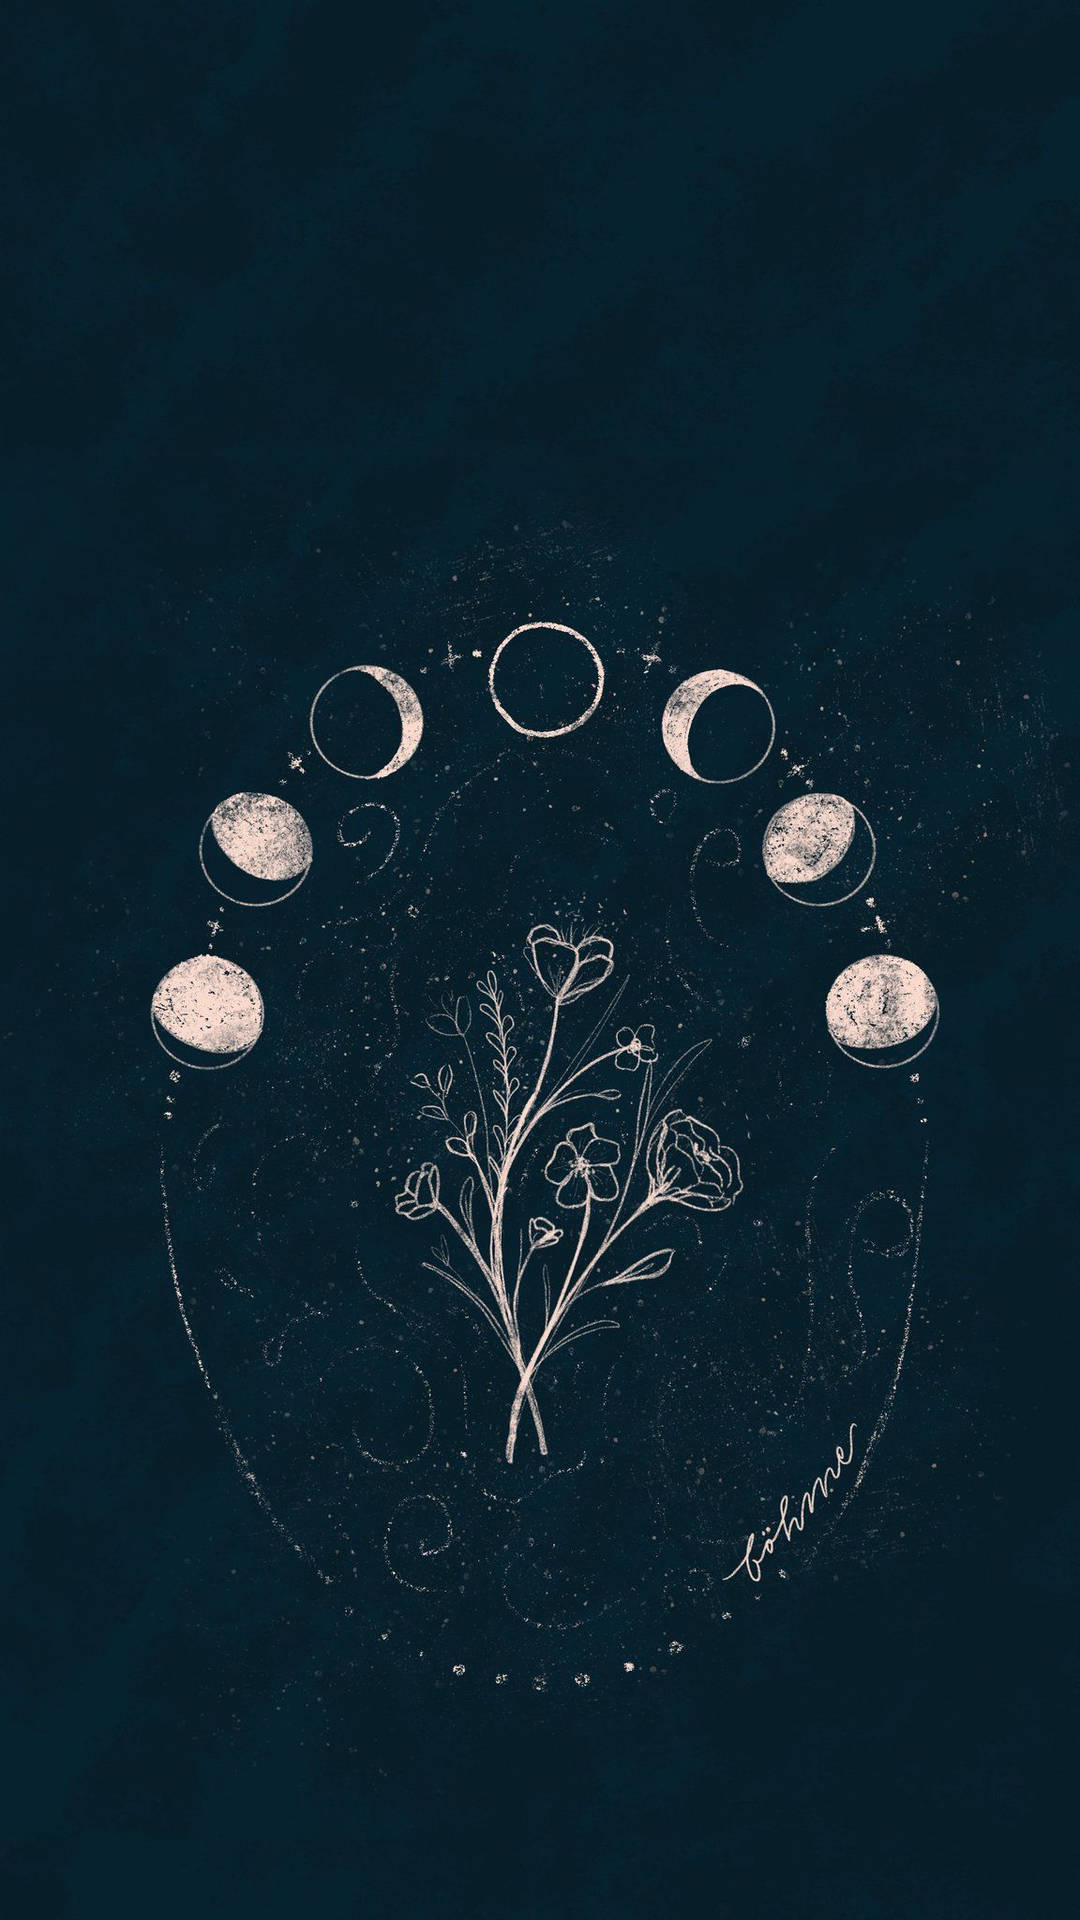 Download Moon Phase Sketch New Phone Wallpaper